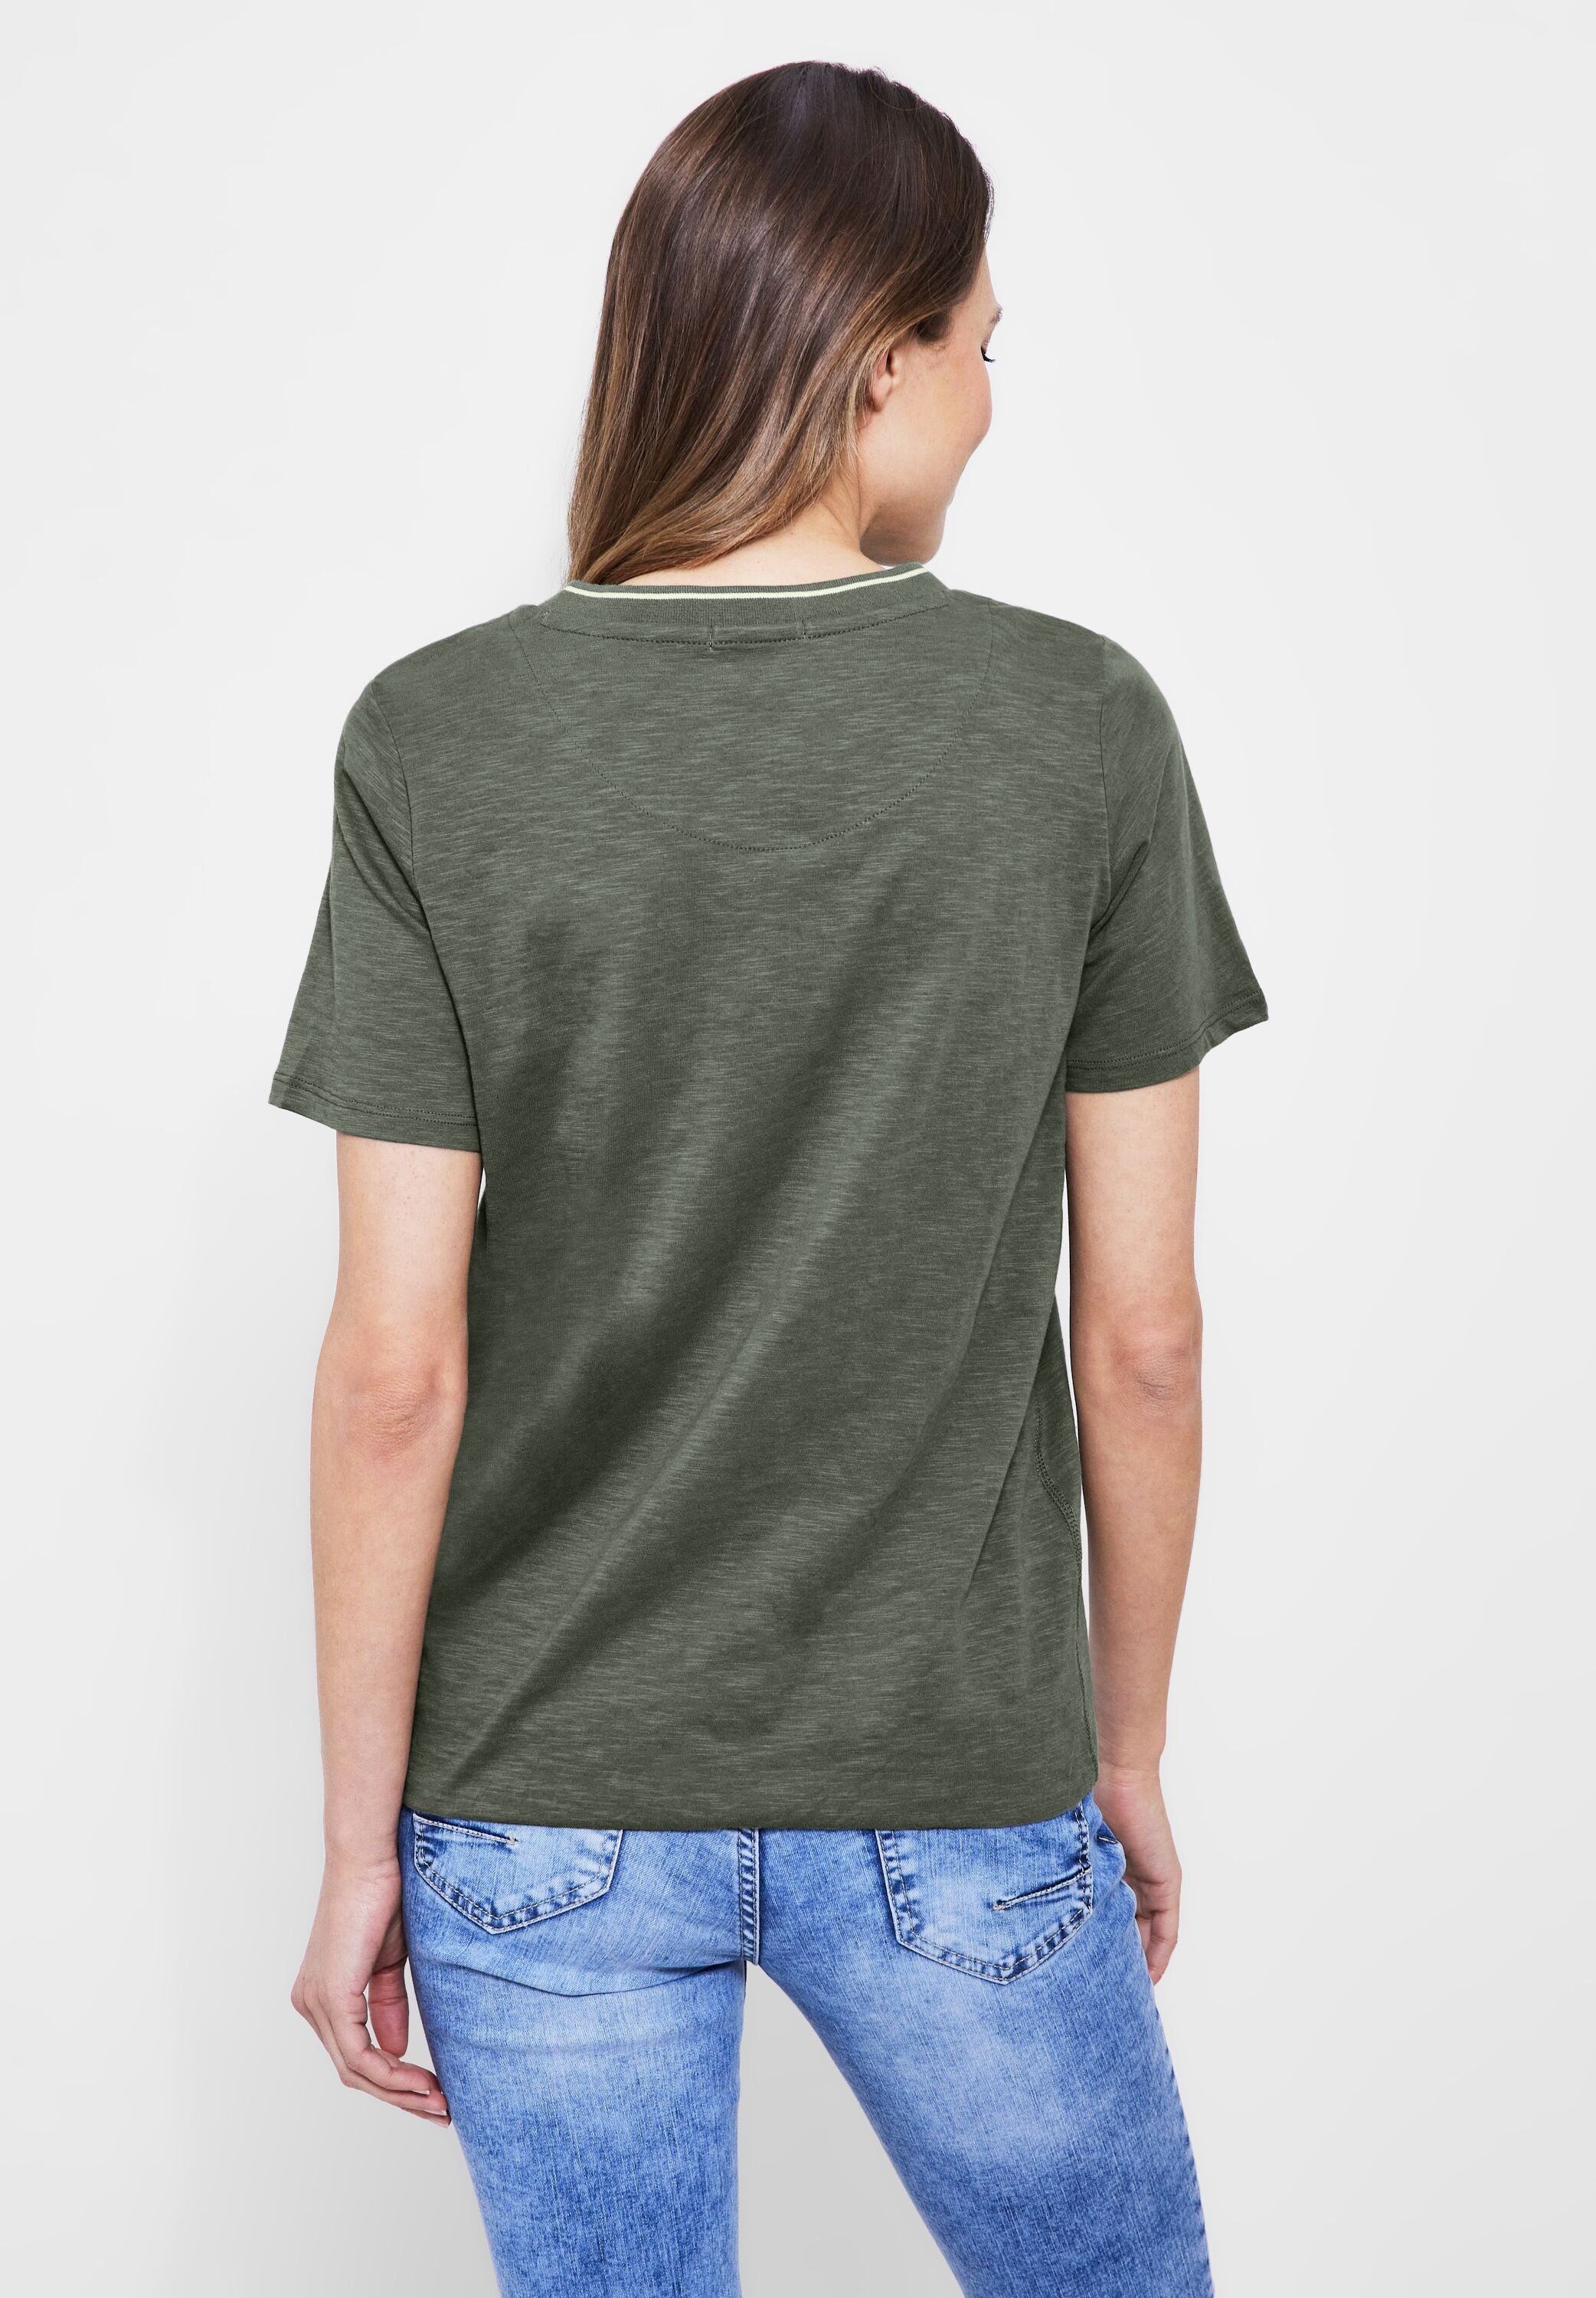 Unifarbe 3/4-Arm-Shirt desert in olive green Cecil